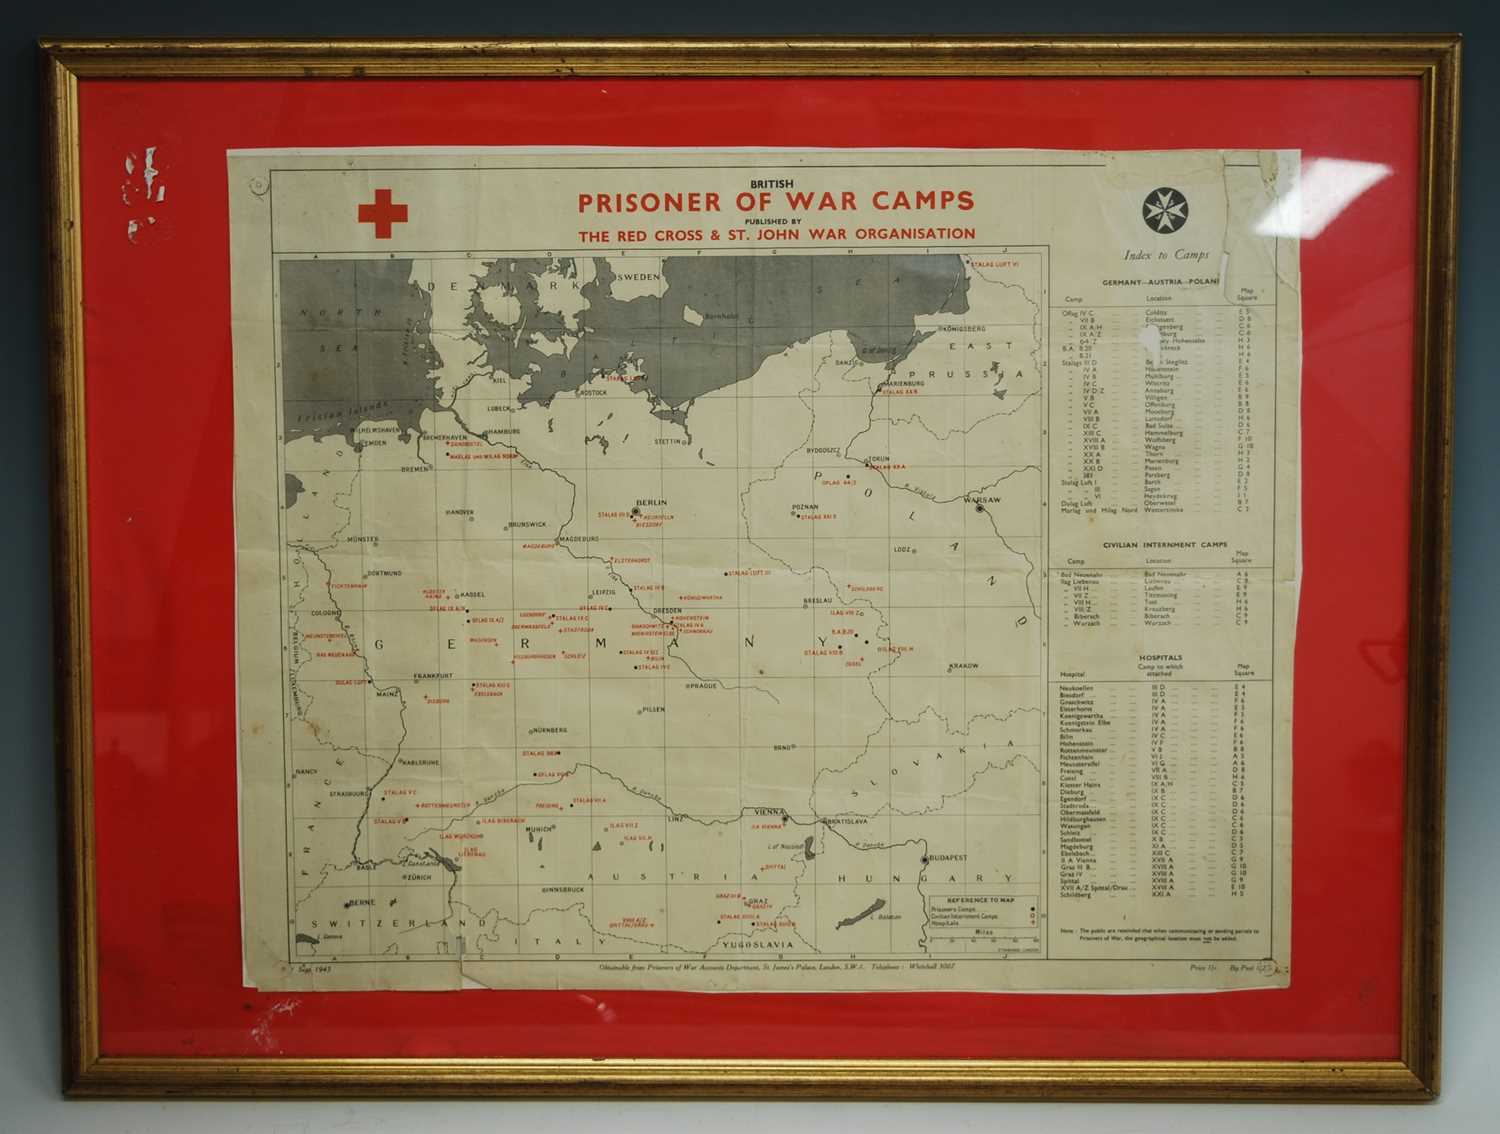 A WW II map of Northern Europe, British Prisoner of War Camps, Published by The Red Cross & St